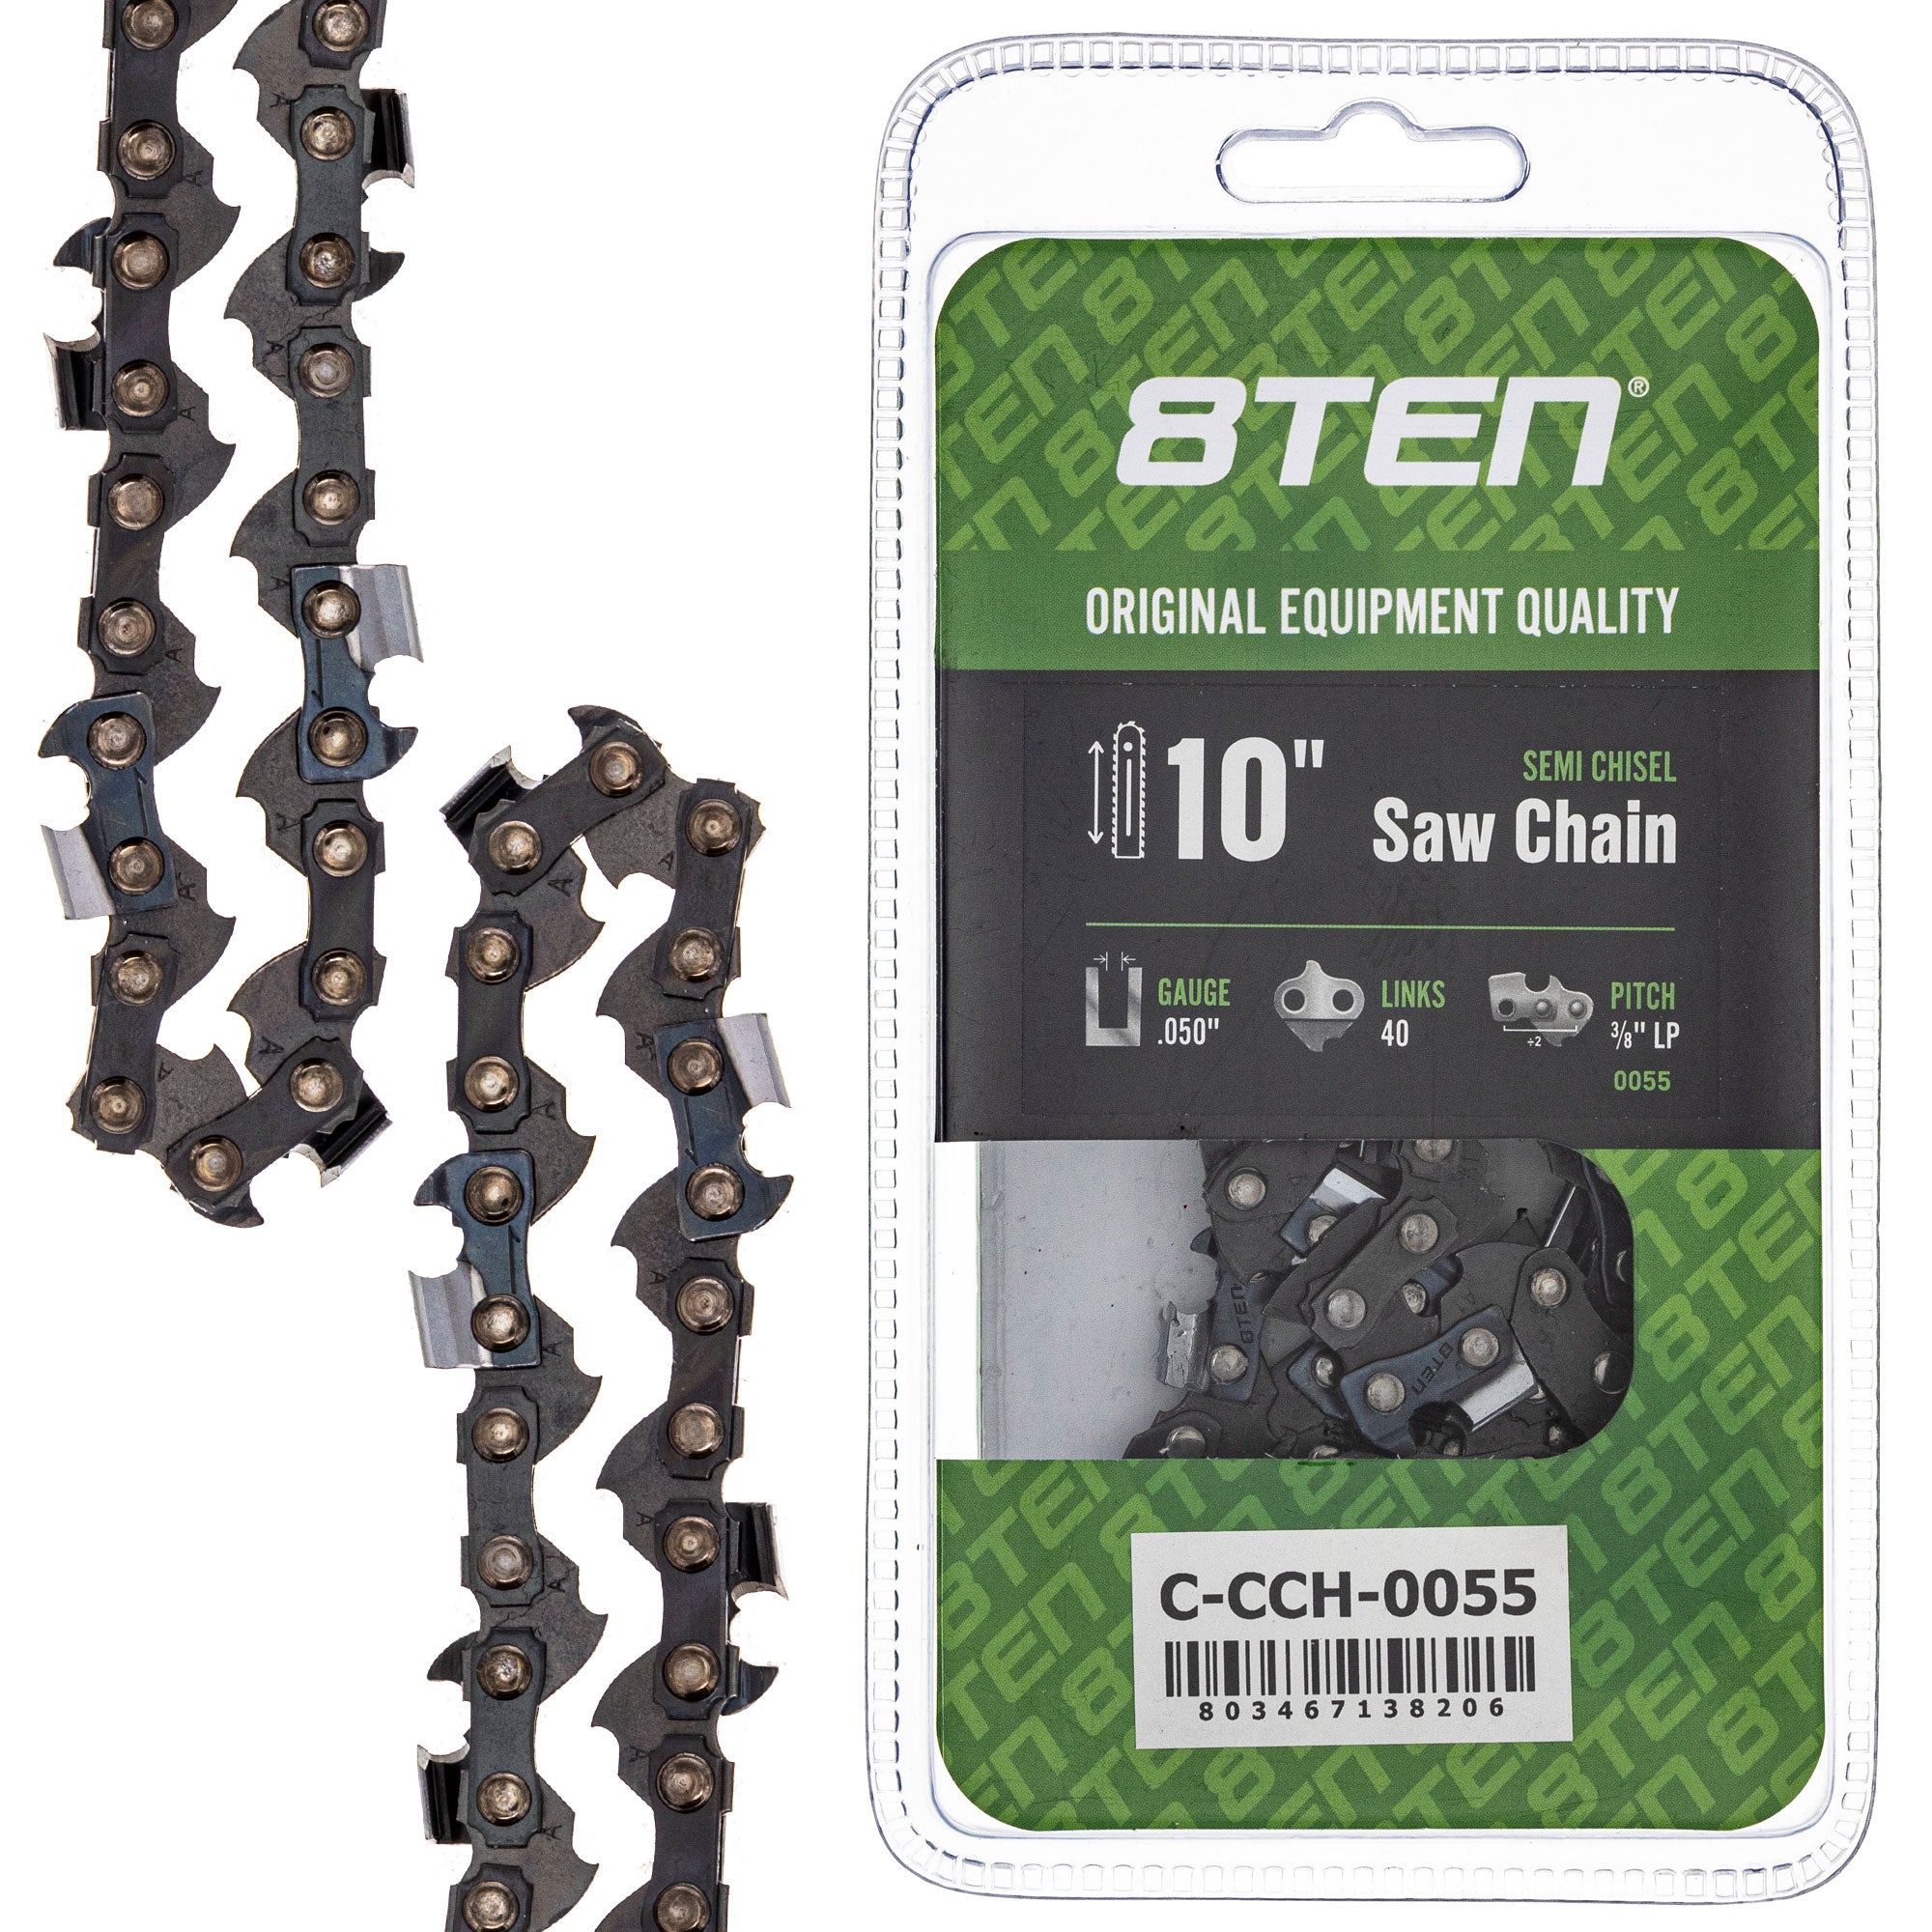 8TEN MK1010255 Guide Bar & Chain for WG309 PSCS06B00 PS43010